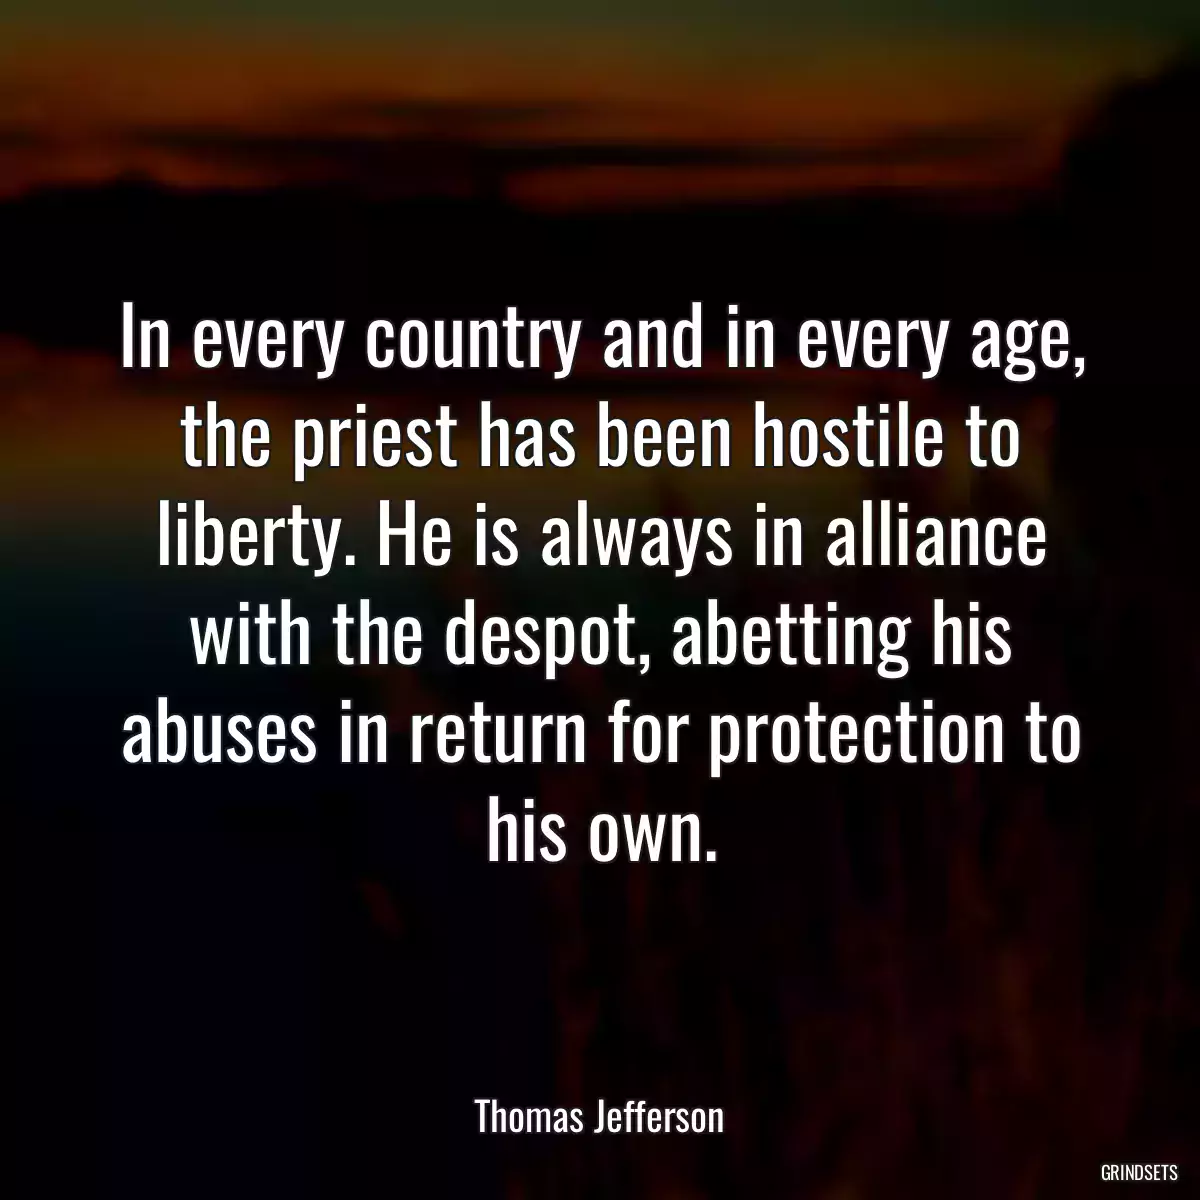 In every country and in every age, the priest has been hostile to liberty. He is always in alliance with the despot, abetting his abuses in return for protection to his own.